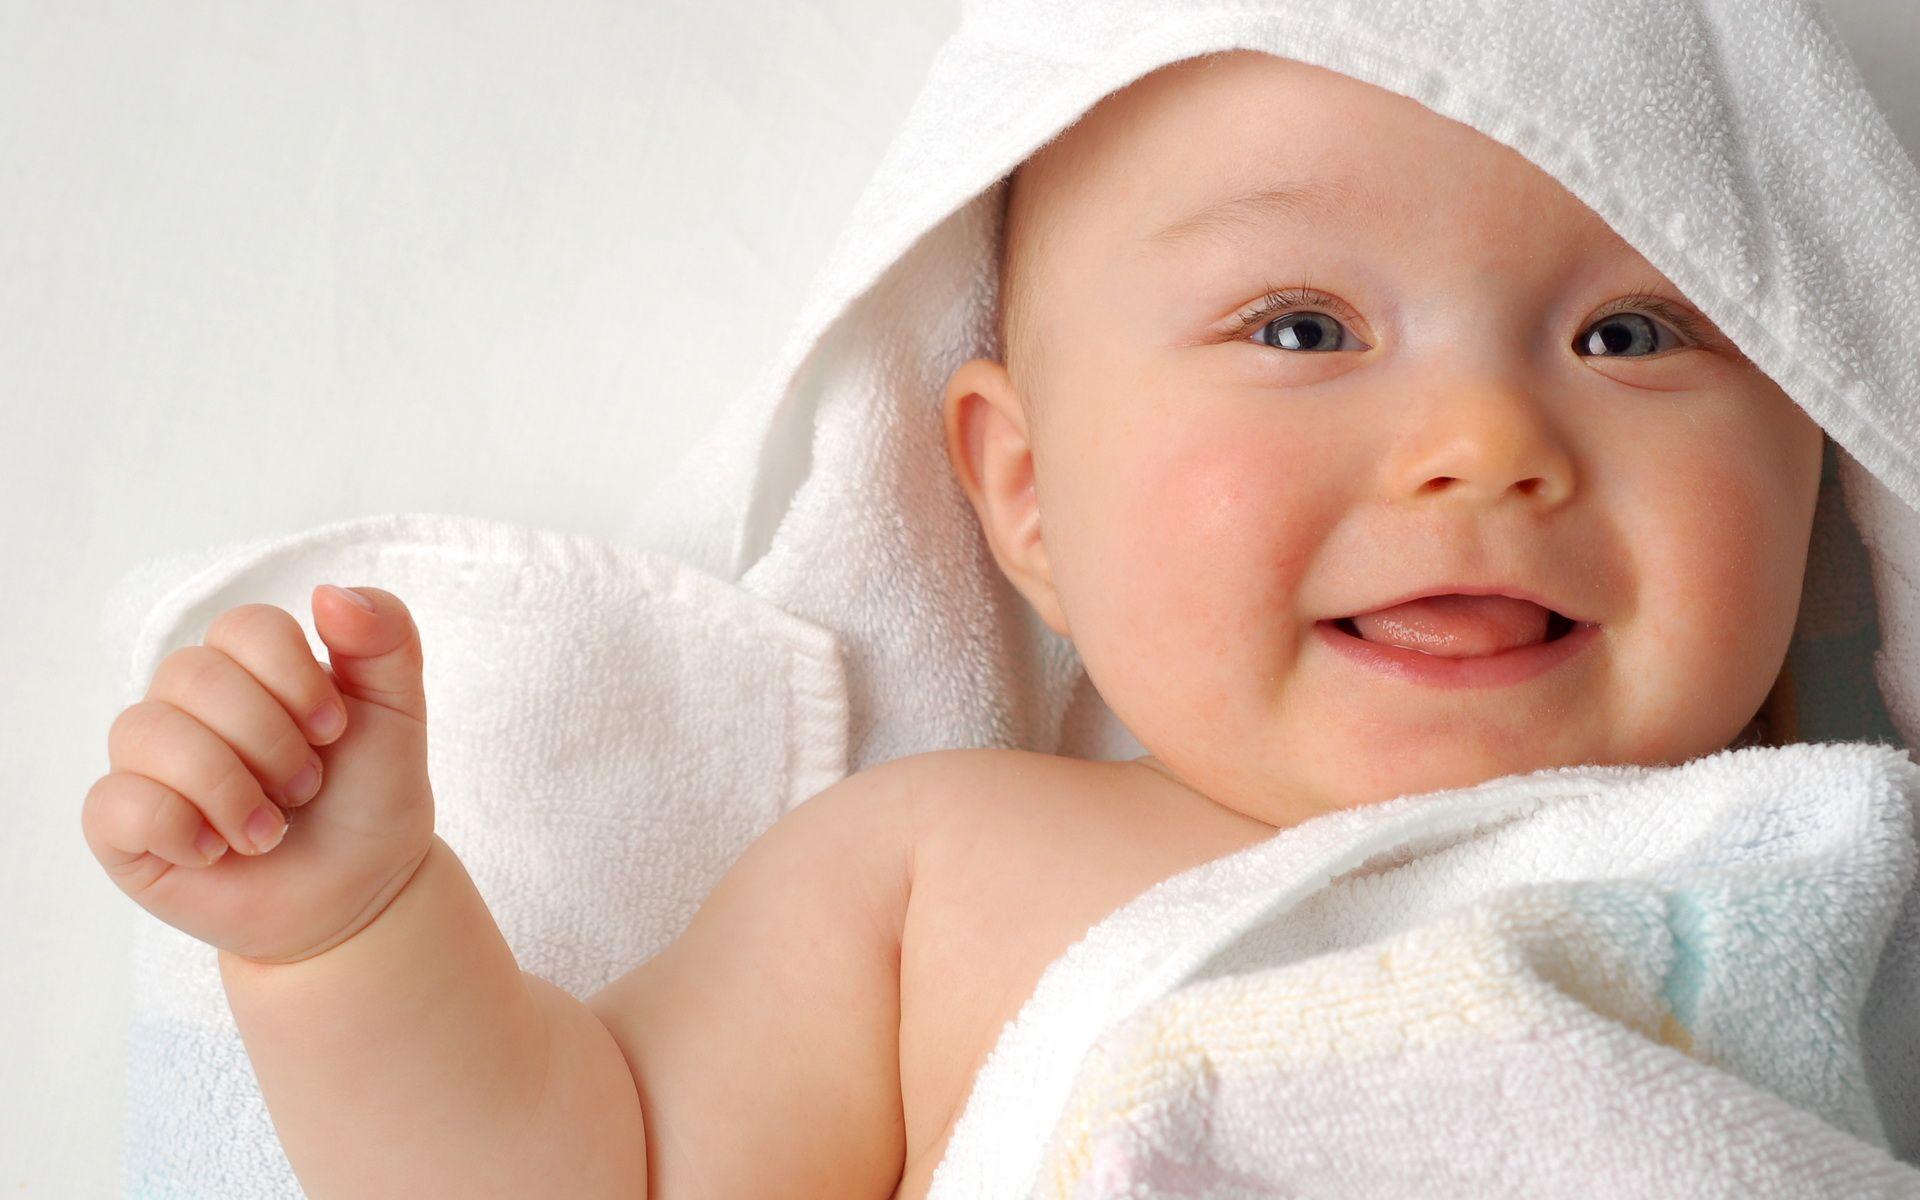 baby after bath Online. Amazing Wallpaper